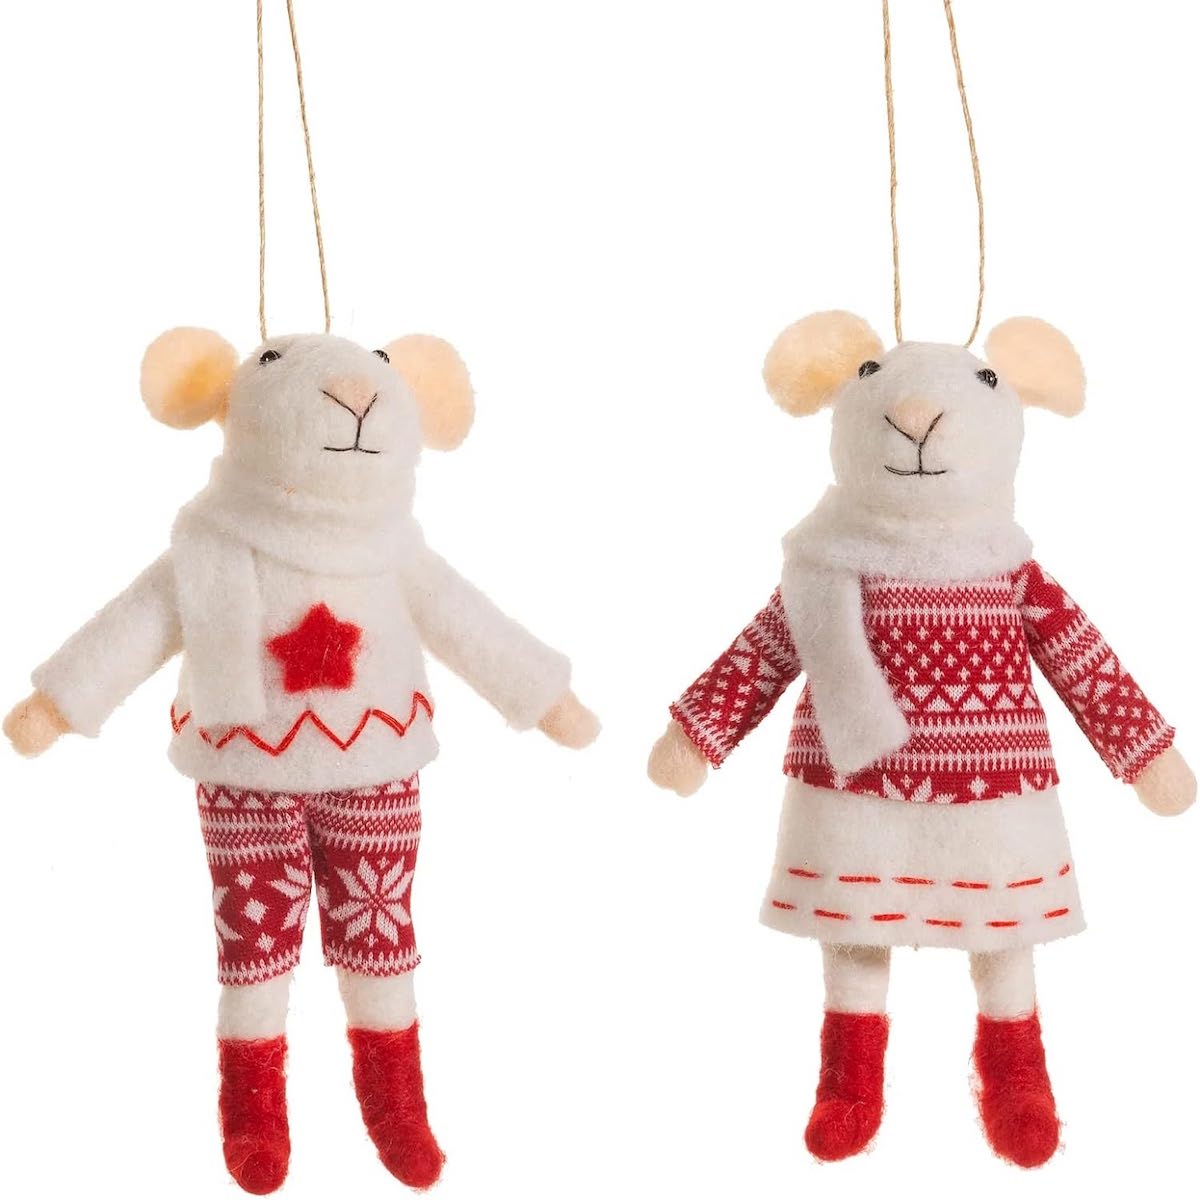 Sass & Belle Set of 2 Felt Mice in Knitted Jumpers Christmas Tree Decorations